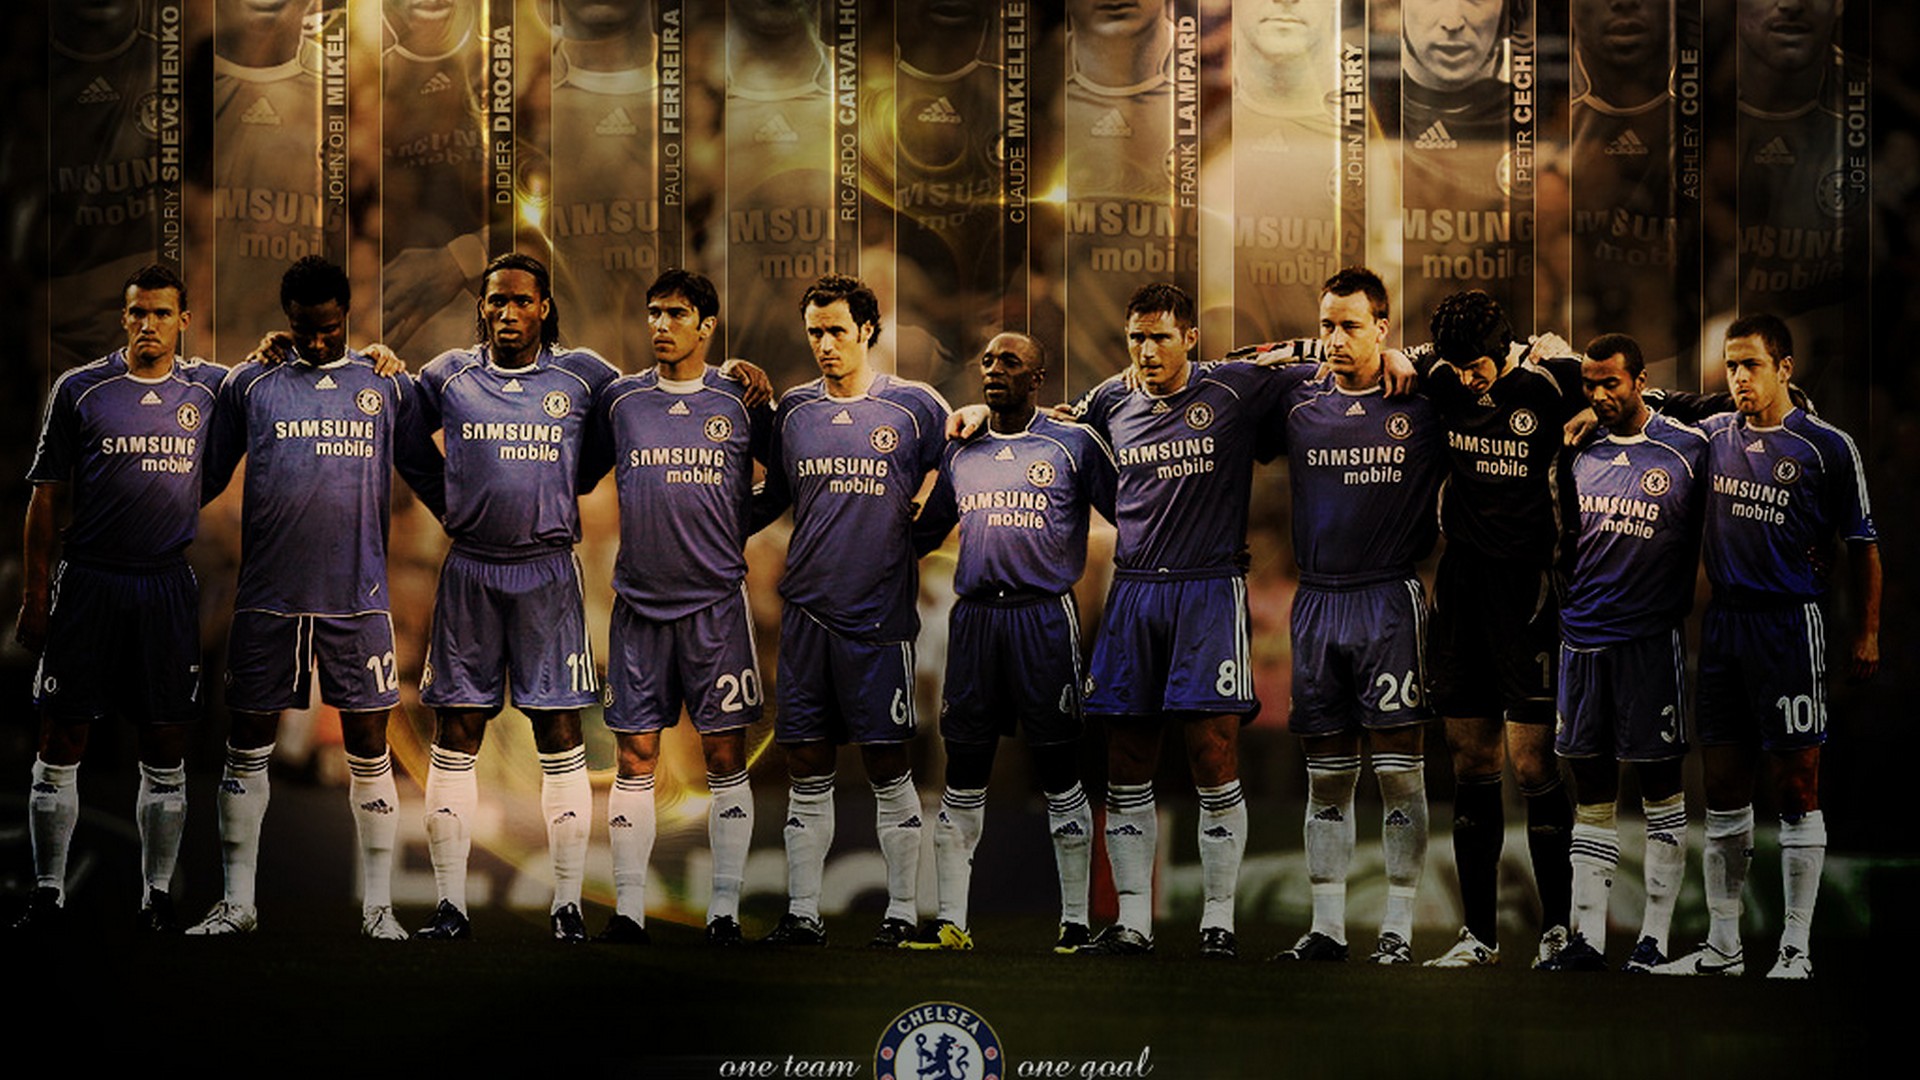 Windows Wallpaper Chelsea FC with high-resolution 1920x1080 pixel. You can use this wallpaper for your Desktop Computers, Mac Screensavers, Windows Backgrounds, iPhone Wallpapers, Tablet or Android Lock screen and another Mobile device